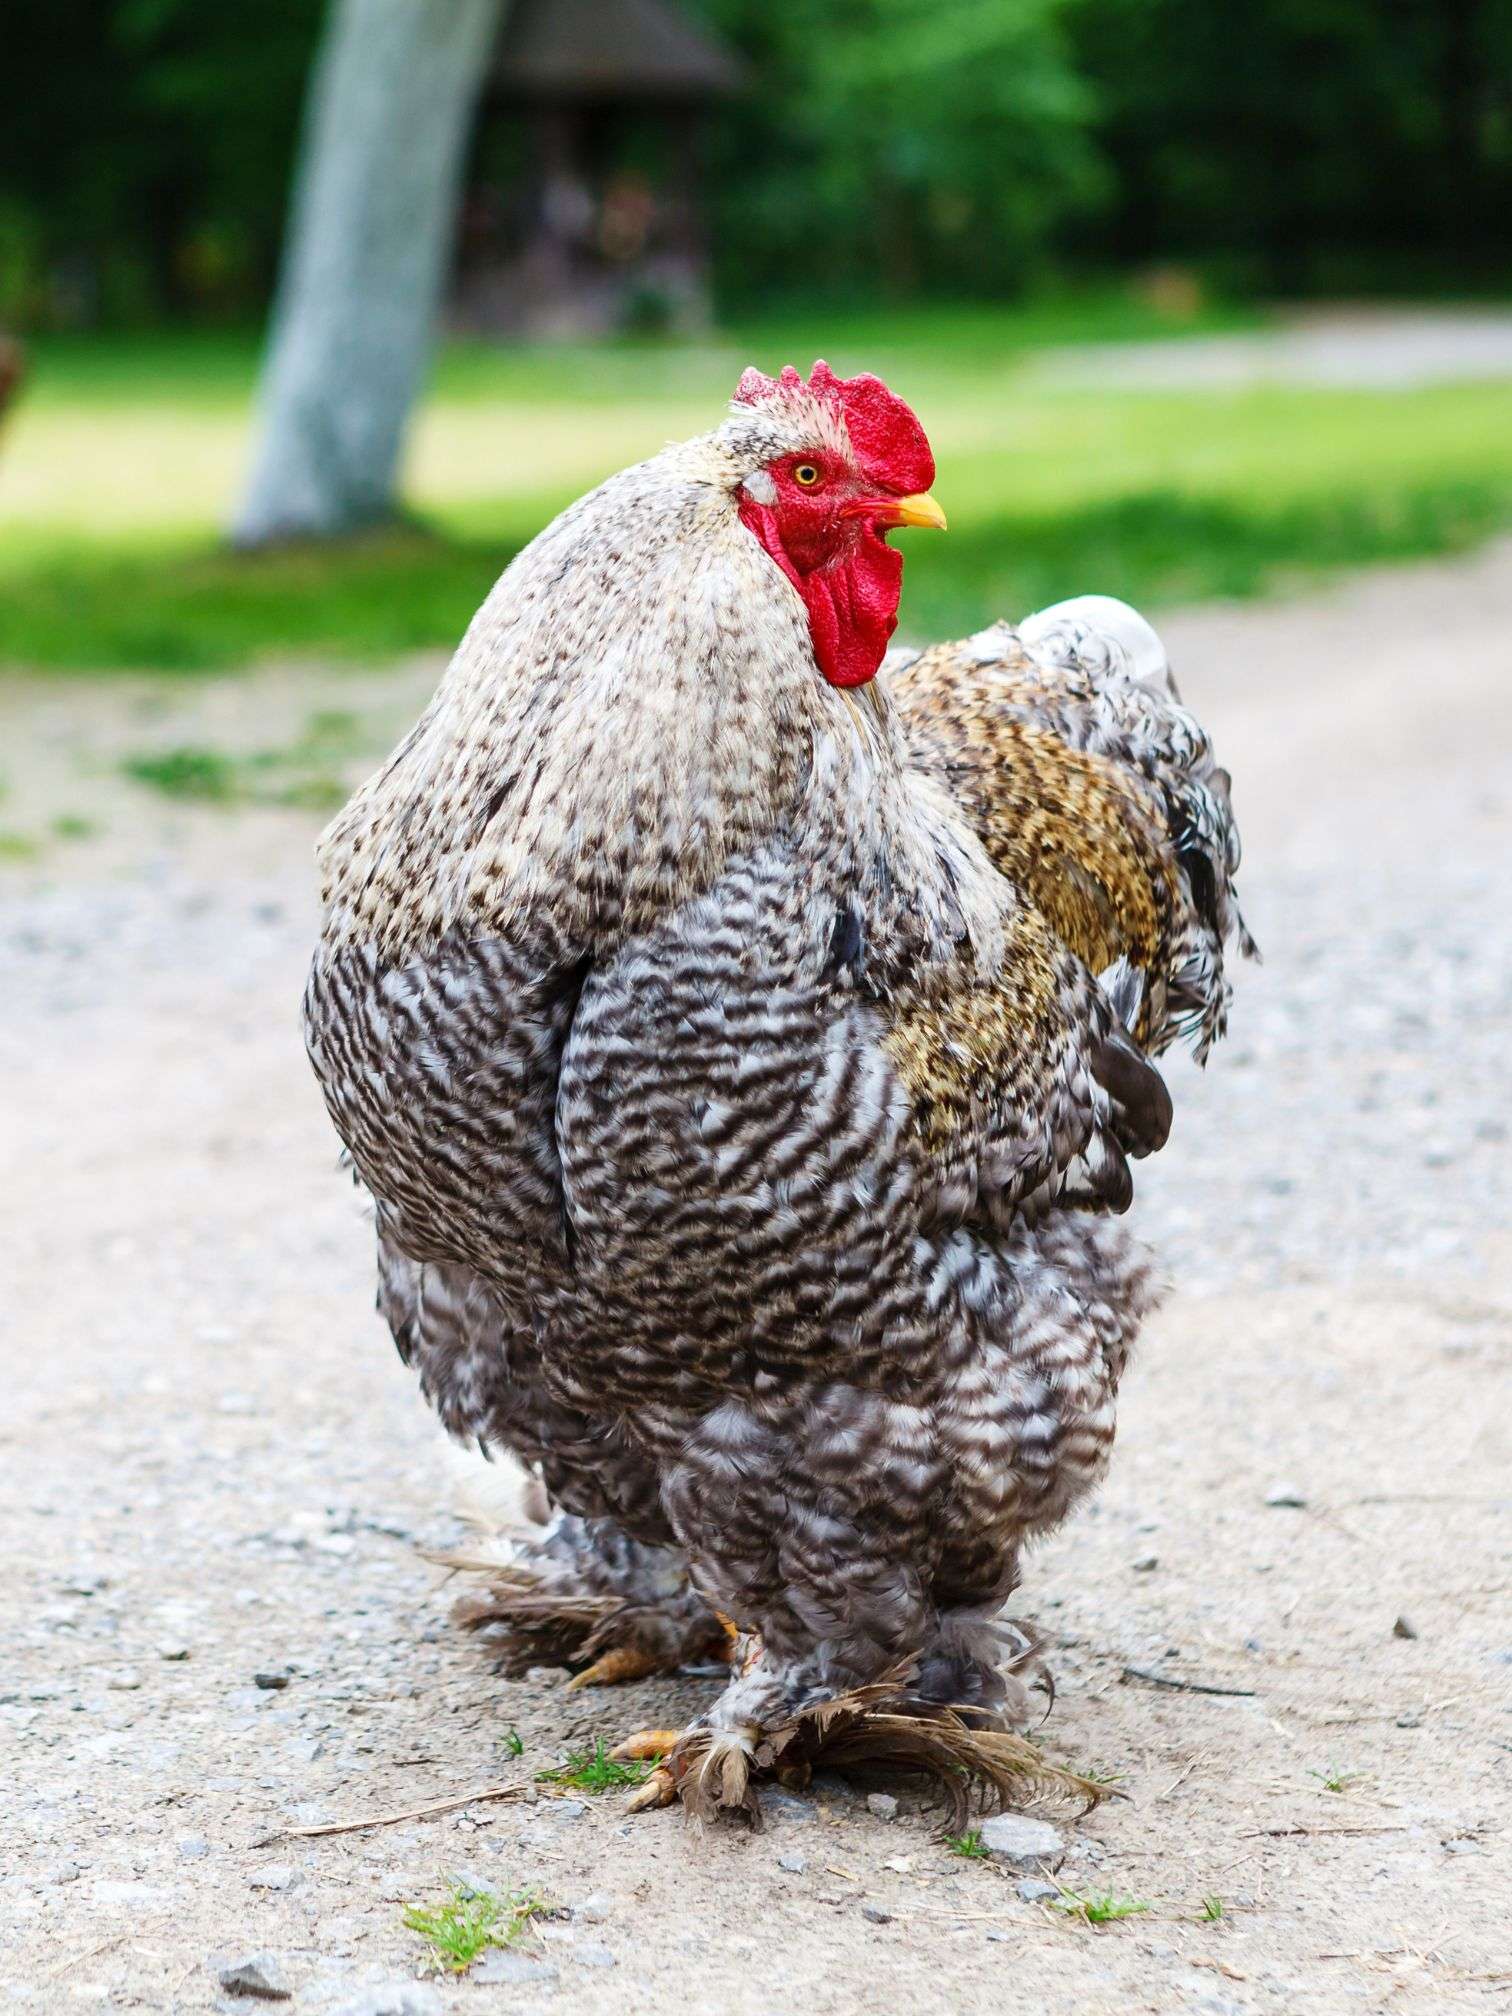 A cochin rooster standing on a driveway